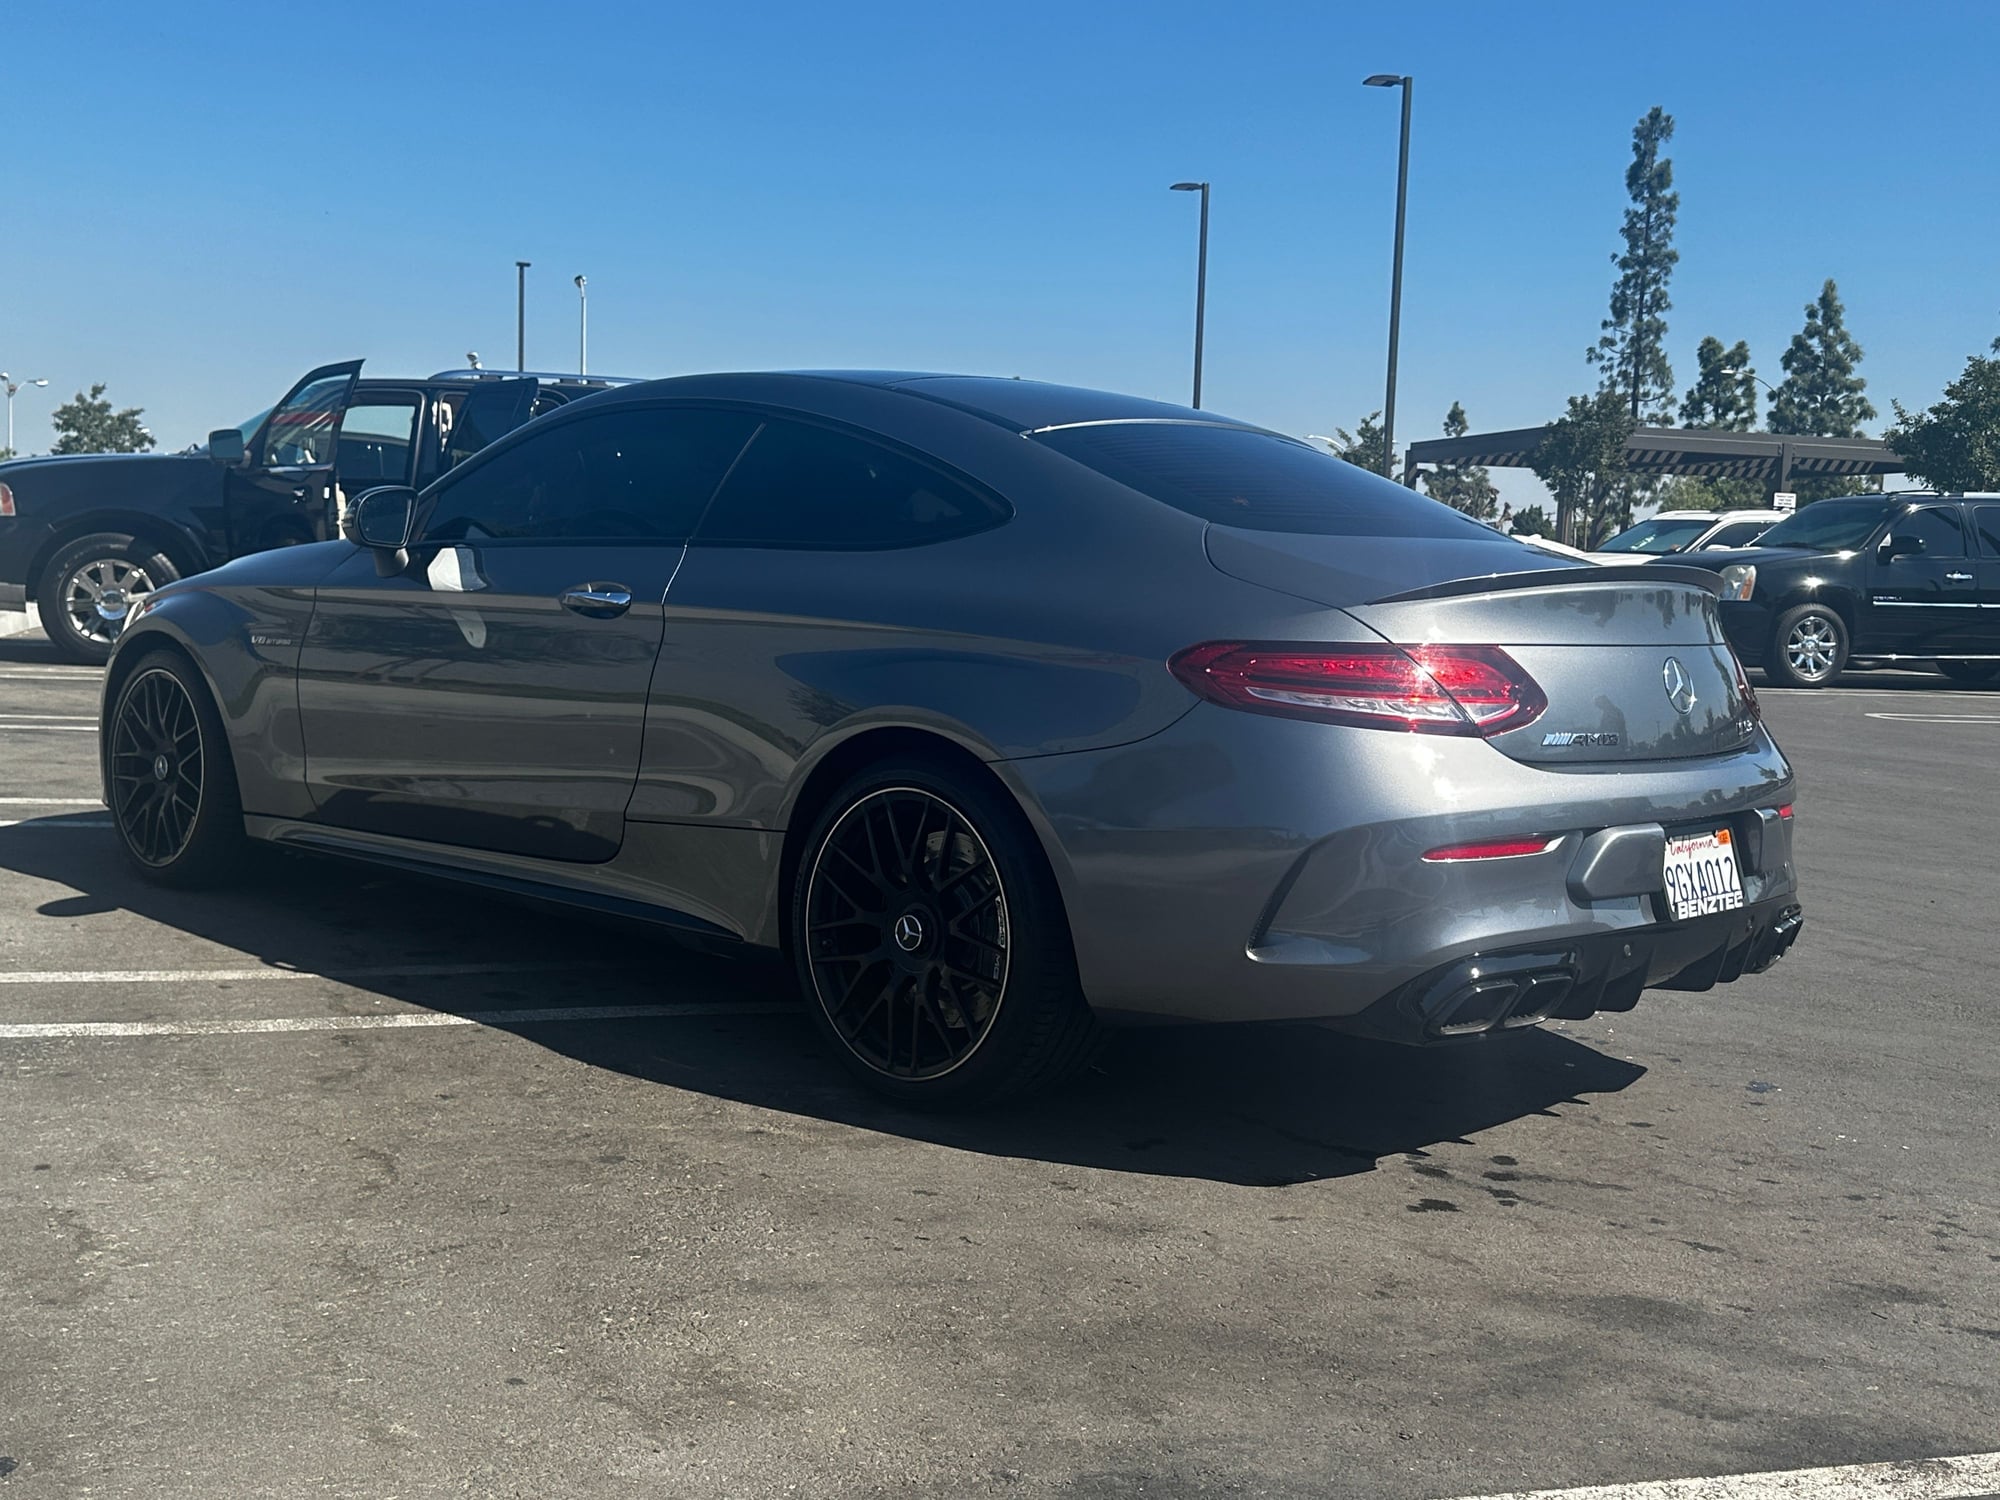 2020 Mercedes-Benz C63 AMG - 2020 C63 - Used - VIN WDDWJ8GB6LF964915 - 38,500 Miles - 8 cyl - 2WD - Automatic - Coupe - Gray - Cerritos, CA 90703, United States